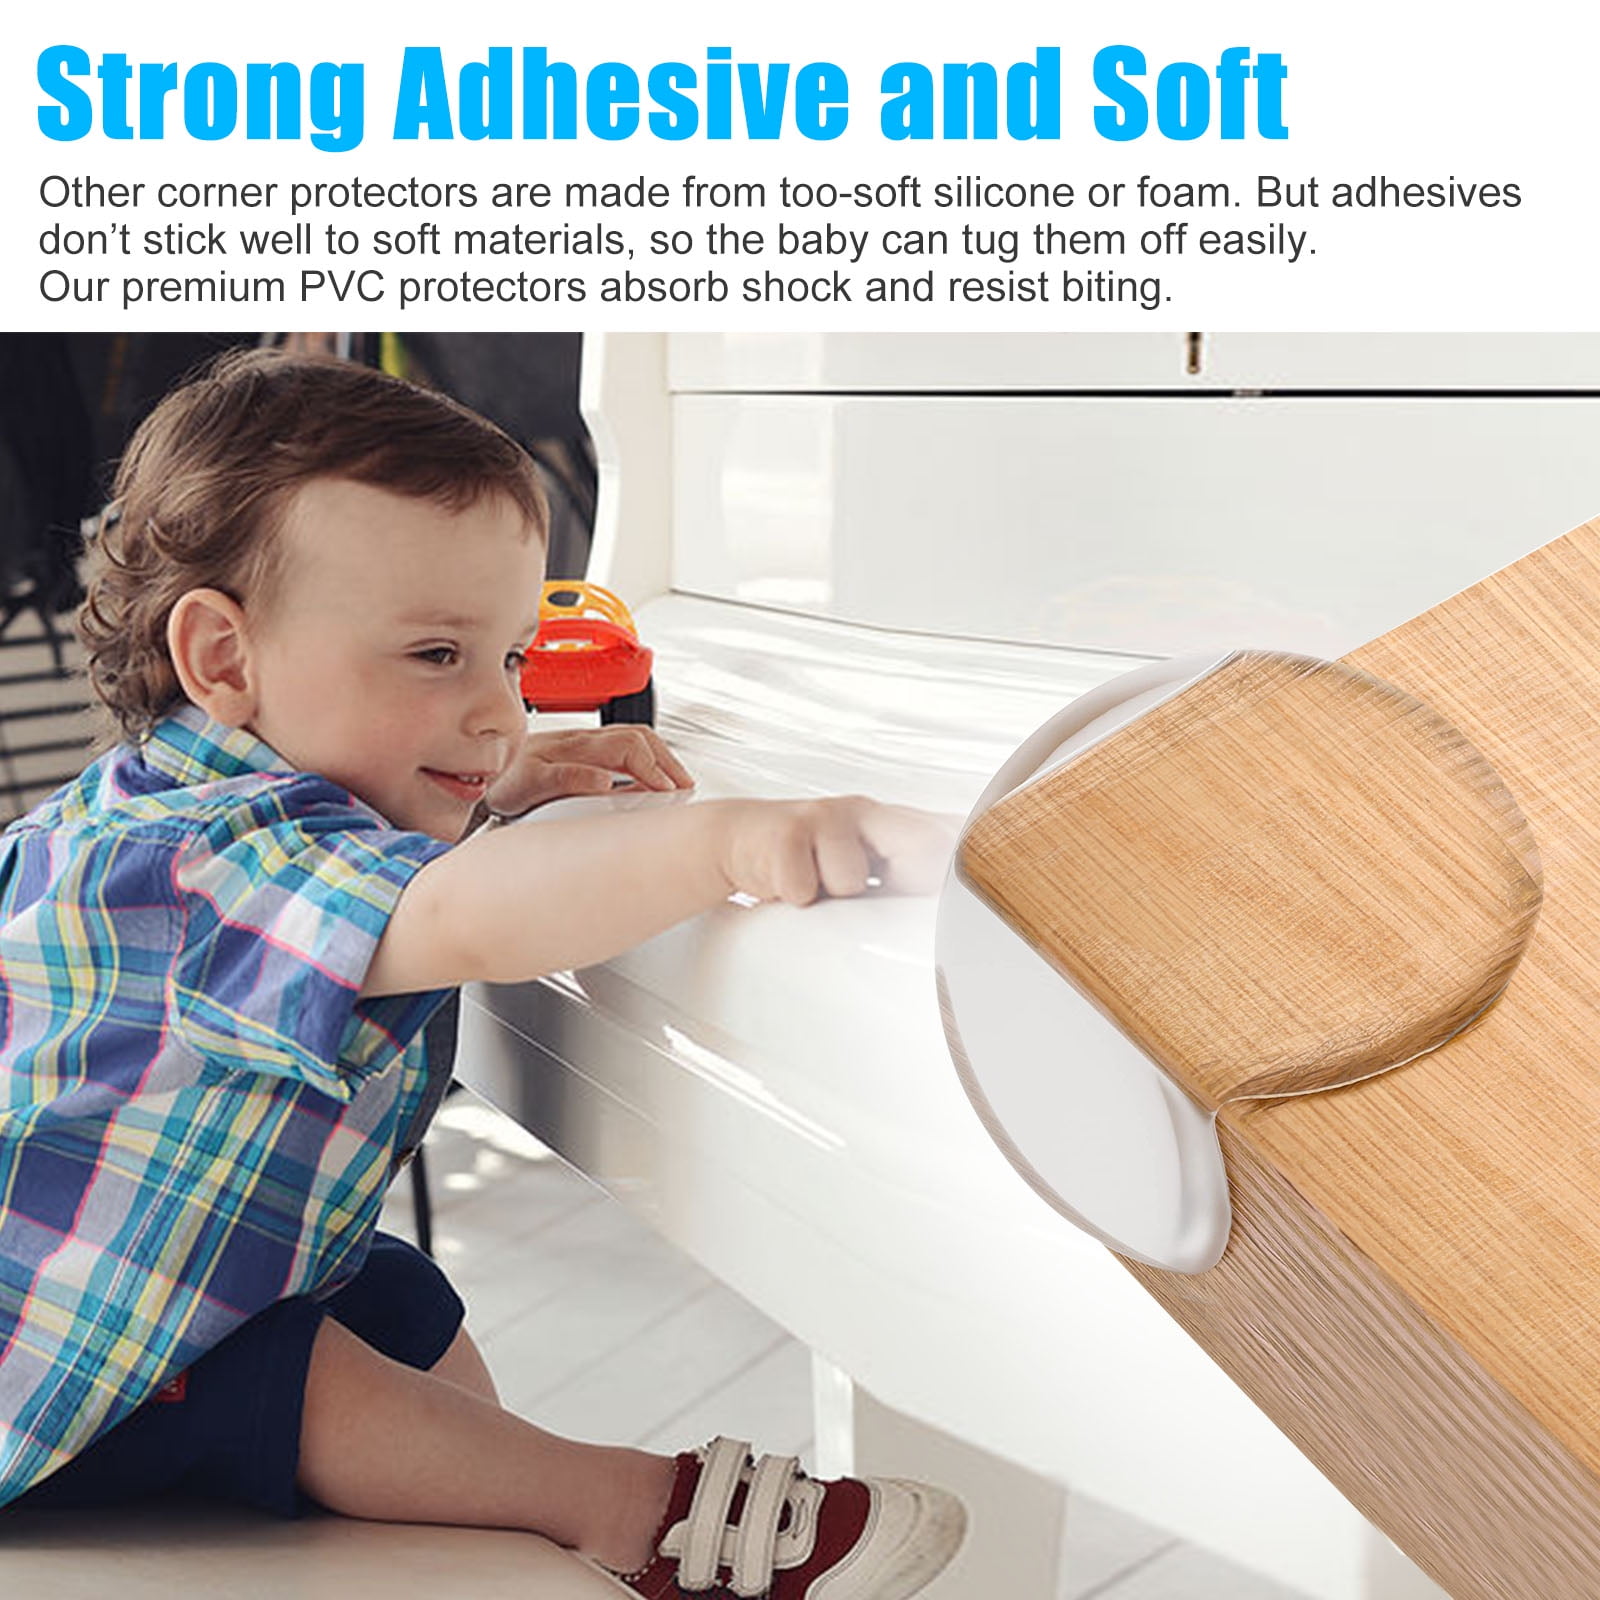 MoHern 24 Pcs Table Corner Protector Baby Safety, Includes 12 Pcs Thickened L-Shaped